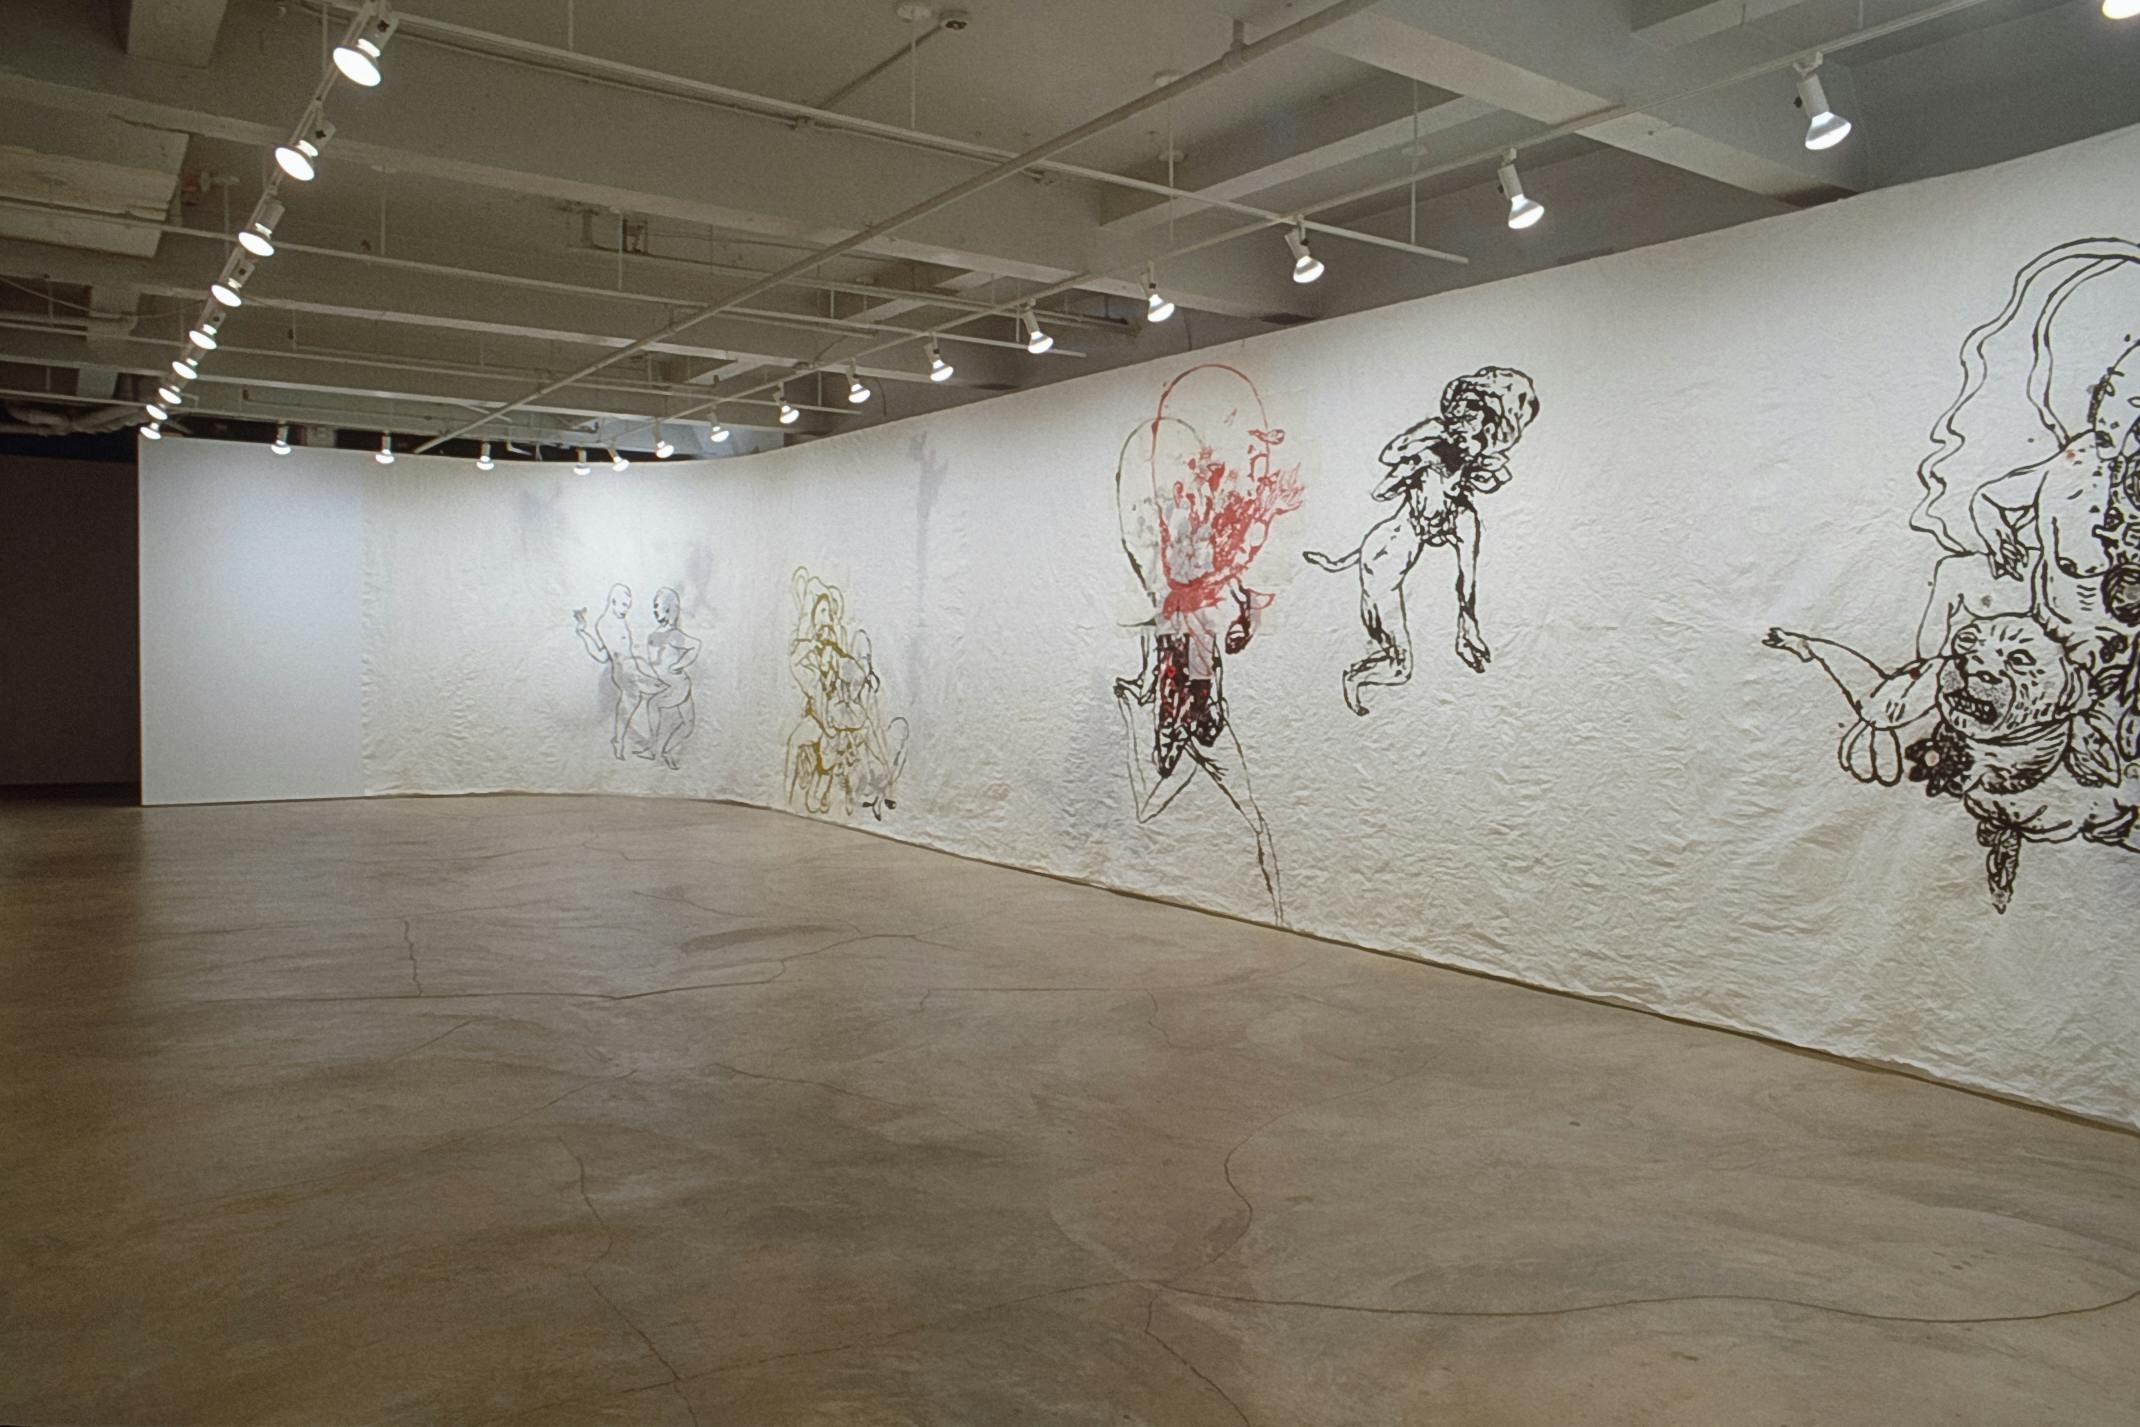 Inside the gallery, walls are covered by white scroll of paper, on which Ed Pien’s drawings are made. These drawings of human and animal figures are spaced out. Most of the lines are drawn in black. 